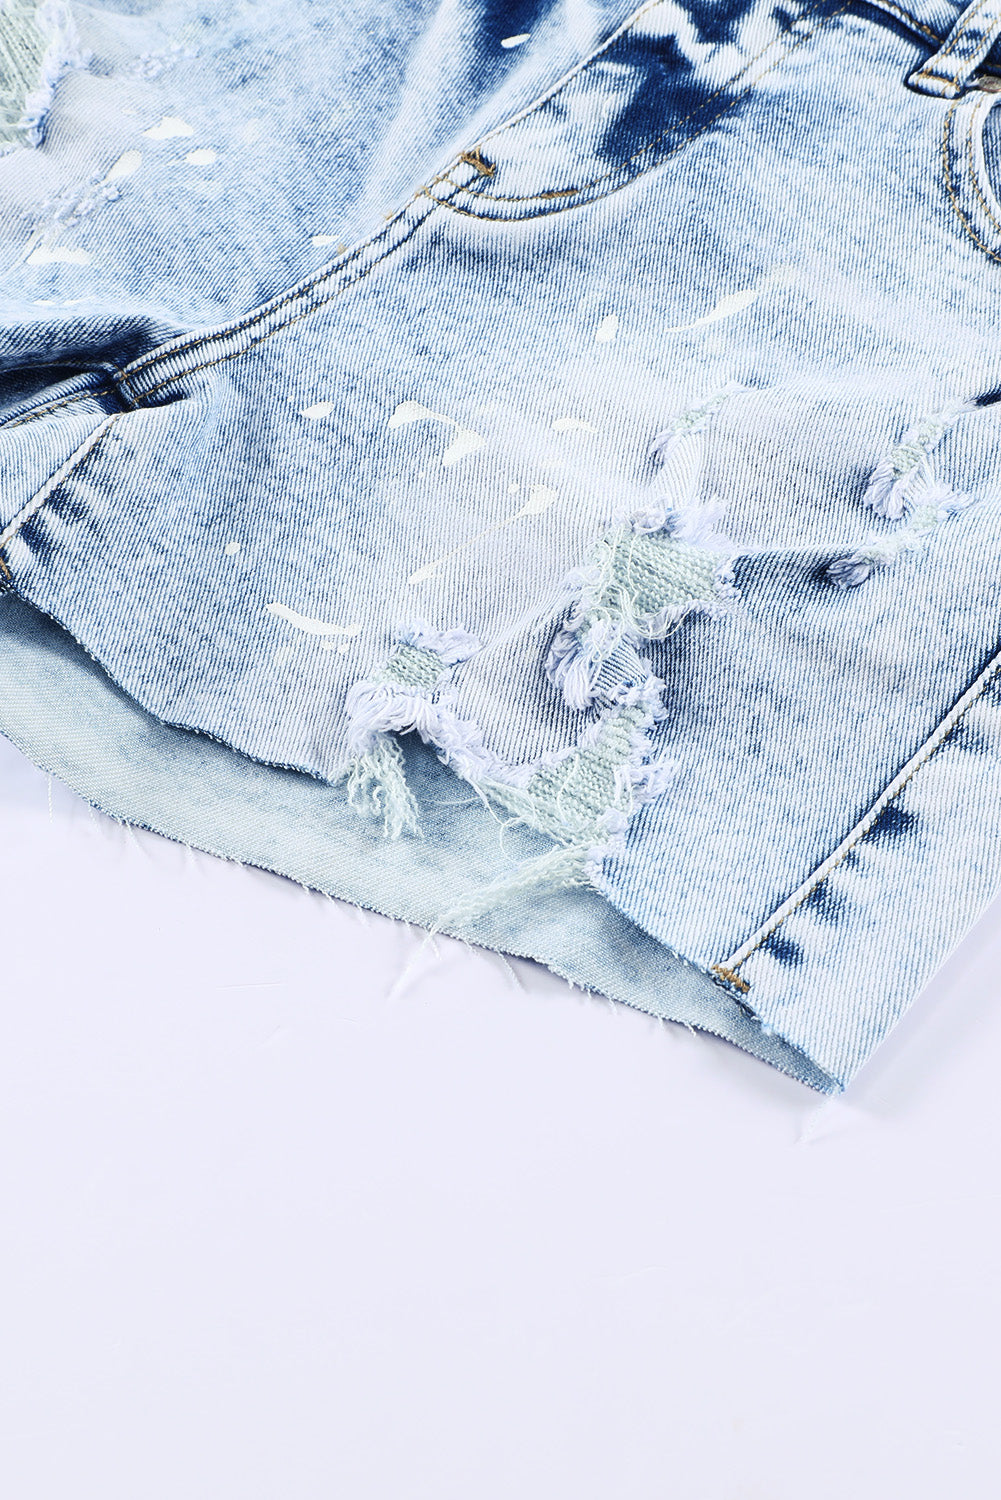 Womens Sky Blue Distressed Bleached Denim Shorts Image 3